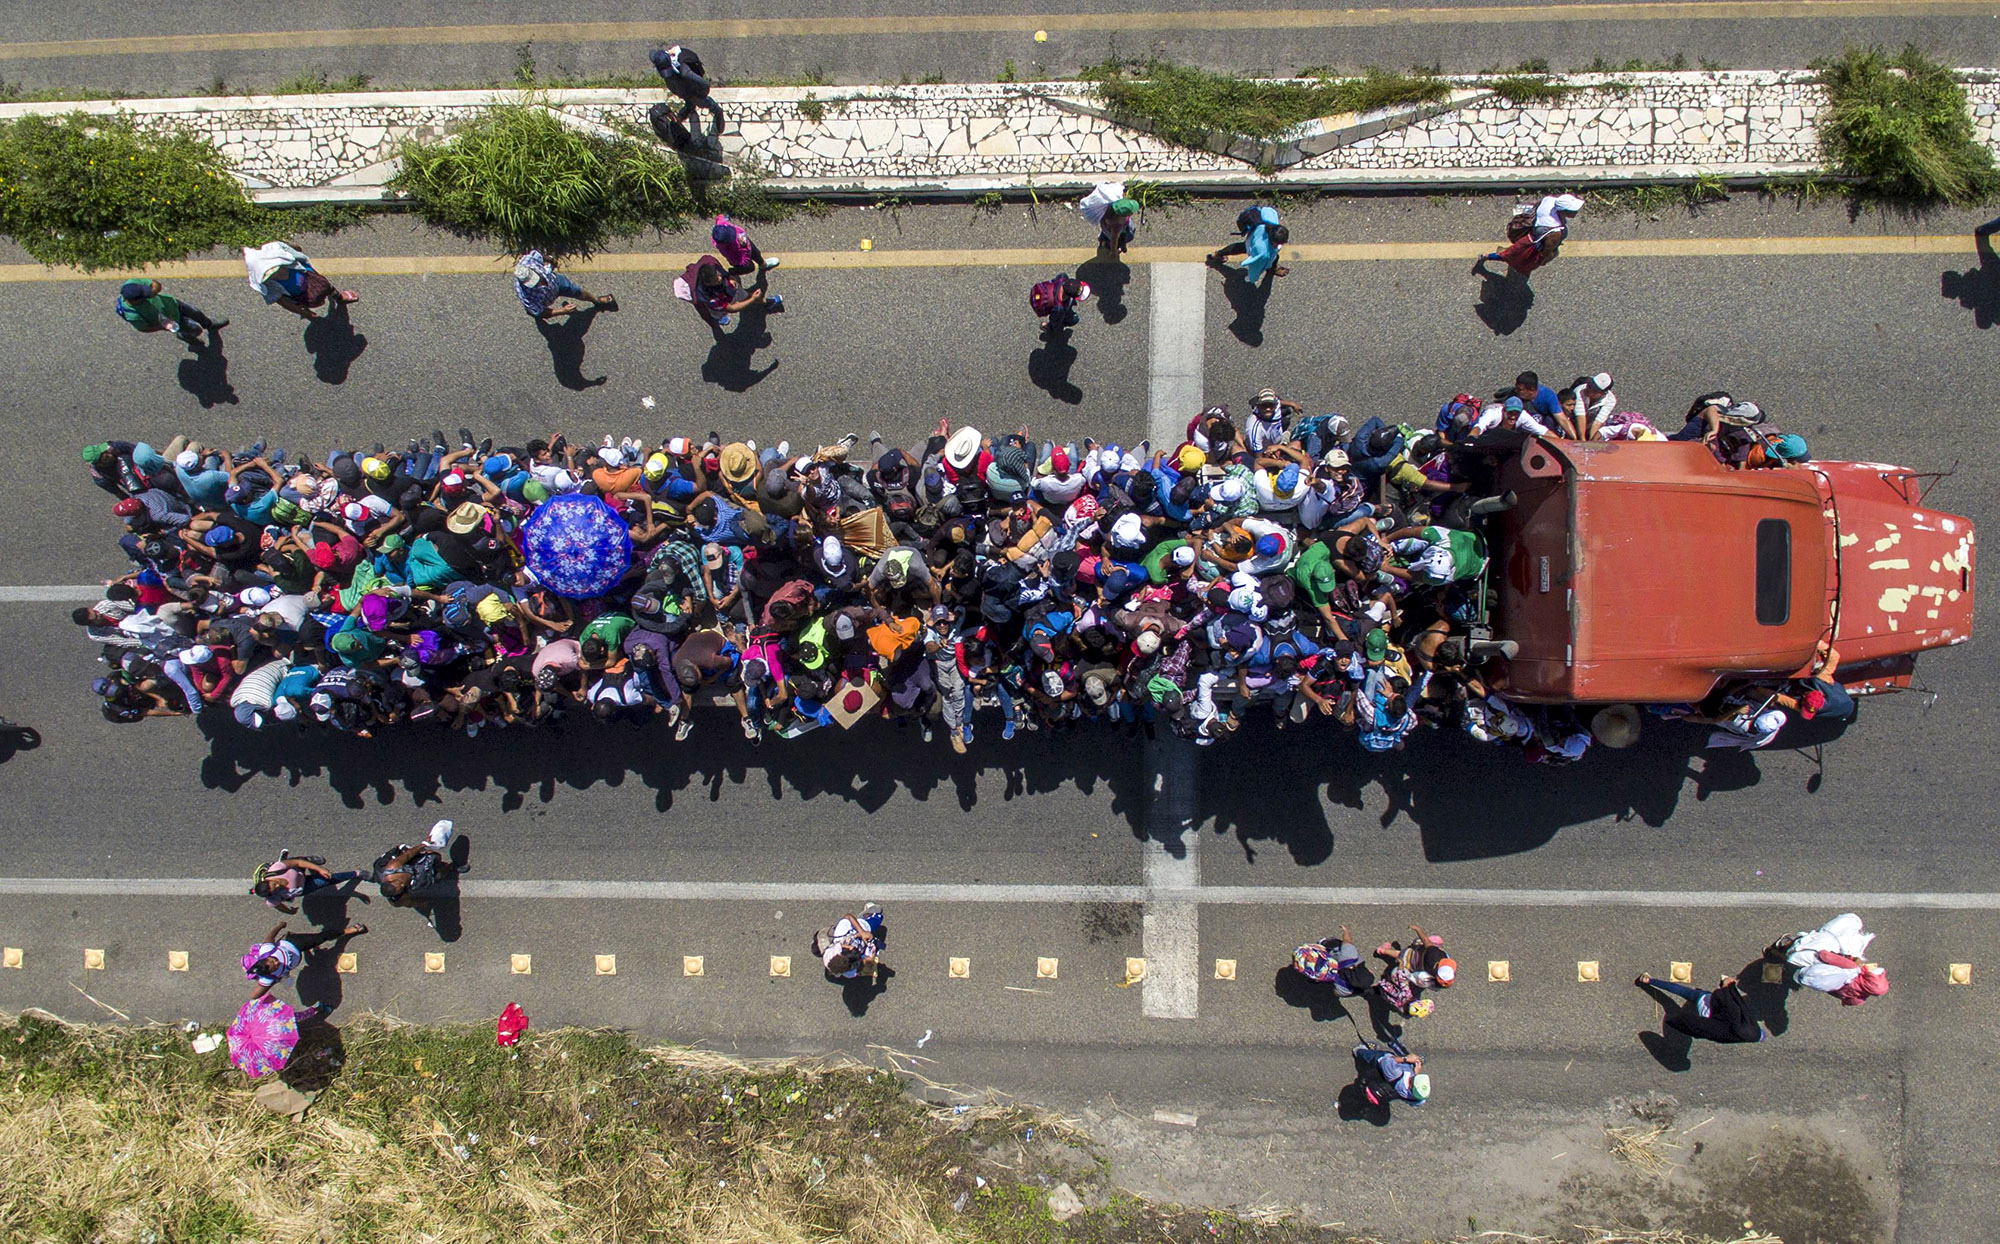 Migrants&nbsp;take part in a caravan&nbsp;on the outskirts of Tapachula, on their way to Huixtla, Chiapas state, Mexico, on Oct.&nbsp;22, 2018.